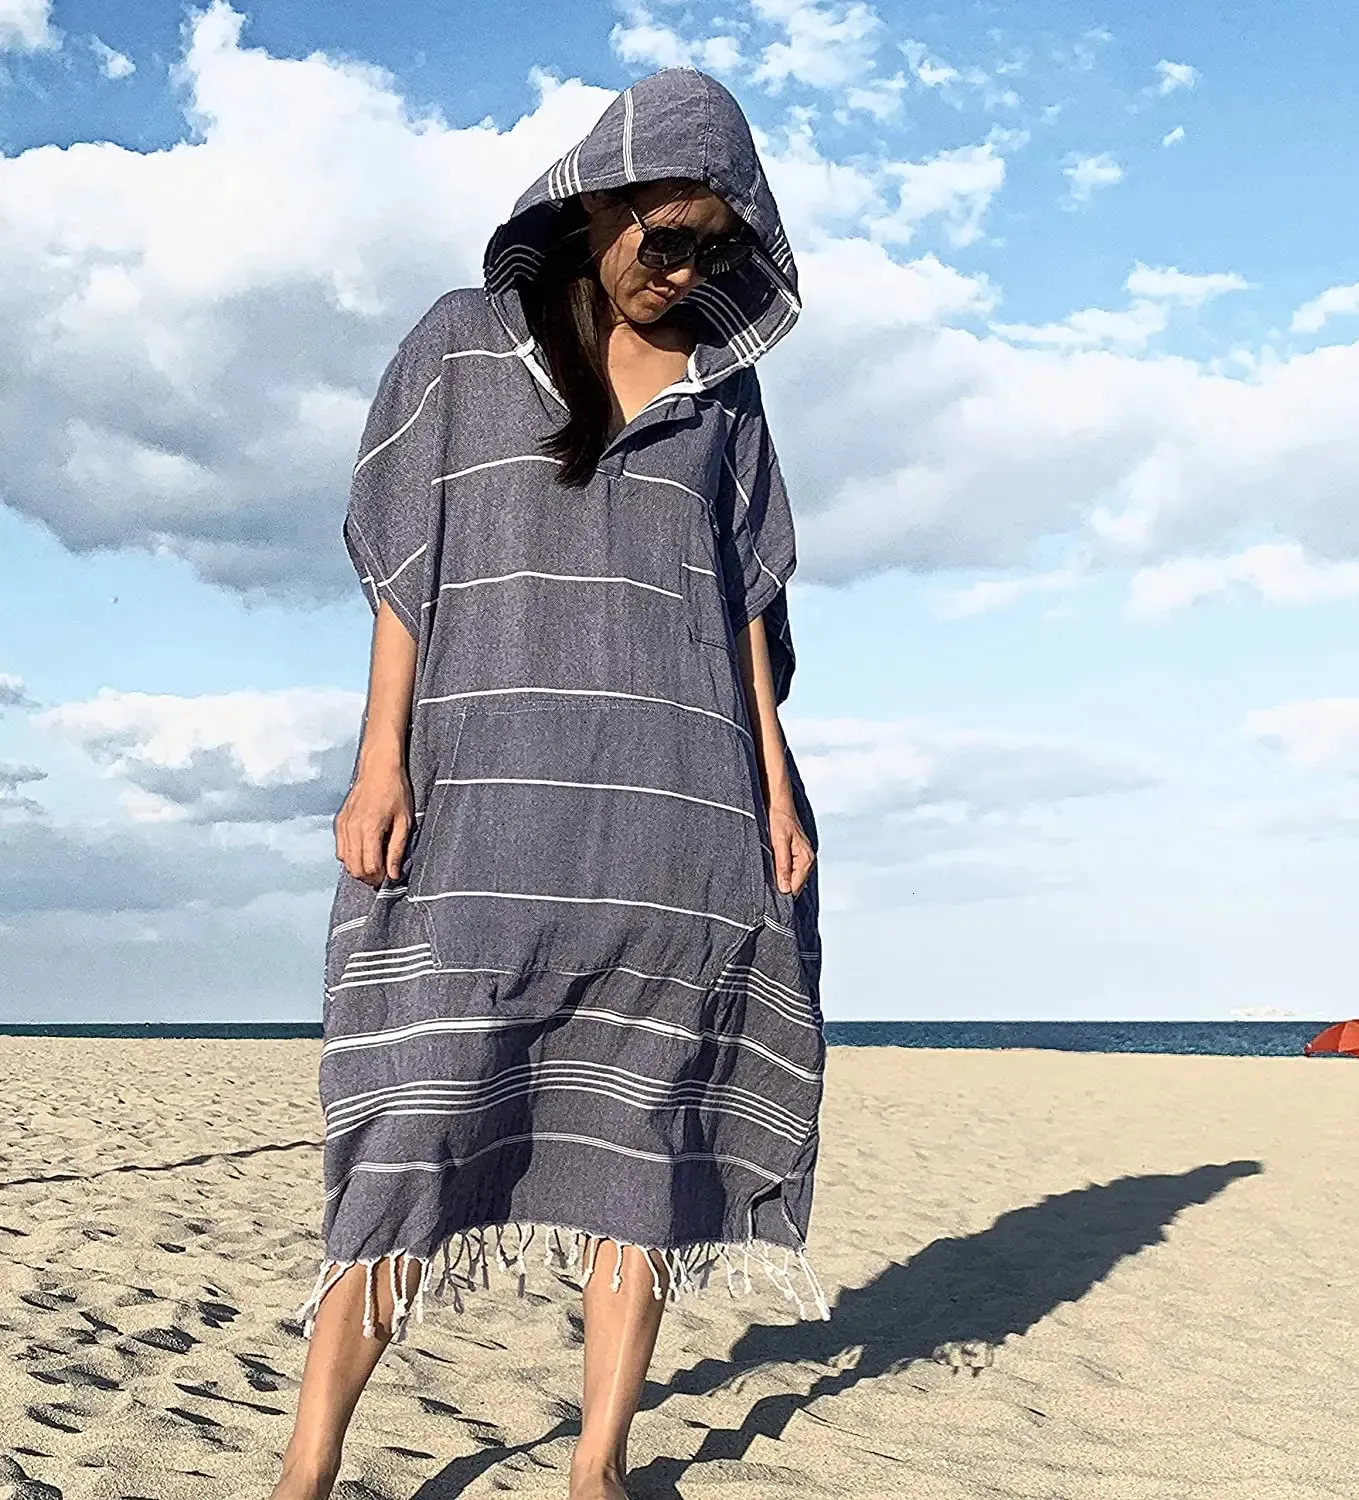 YEUZLICOTTON Wearable Turkish Beach Towel Sandproof 100% Cotton Large Surf Poncho Robe Hooded Wetsuit Changing Towel Quick Dry 240508